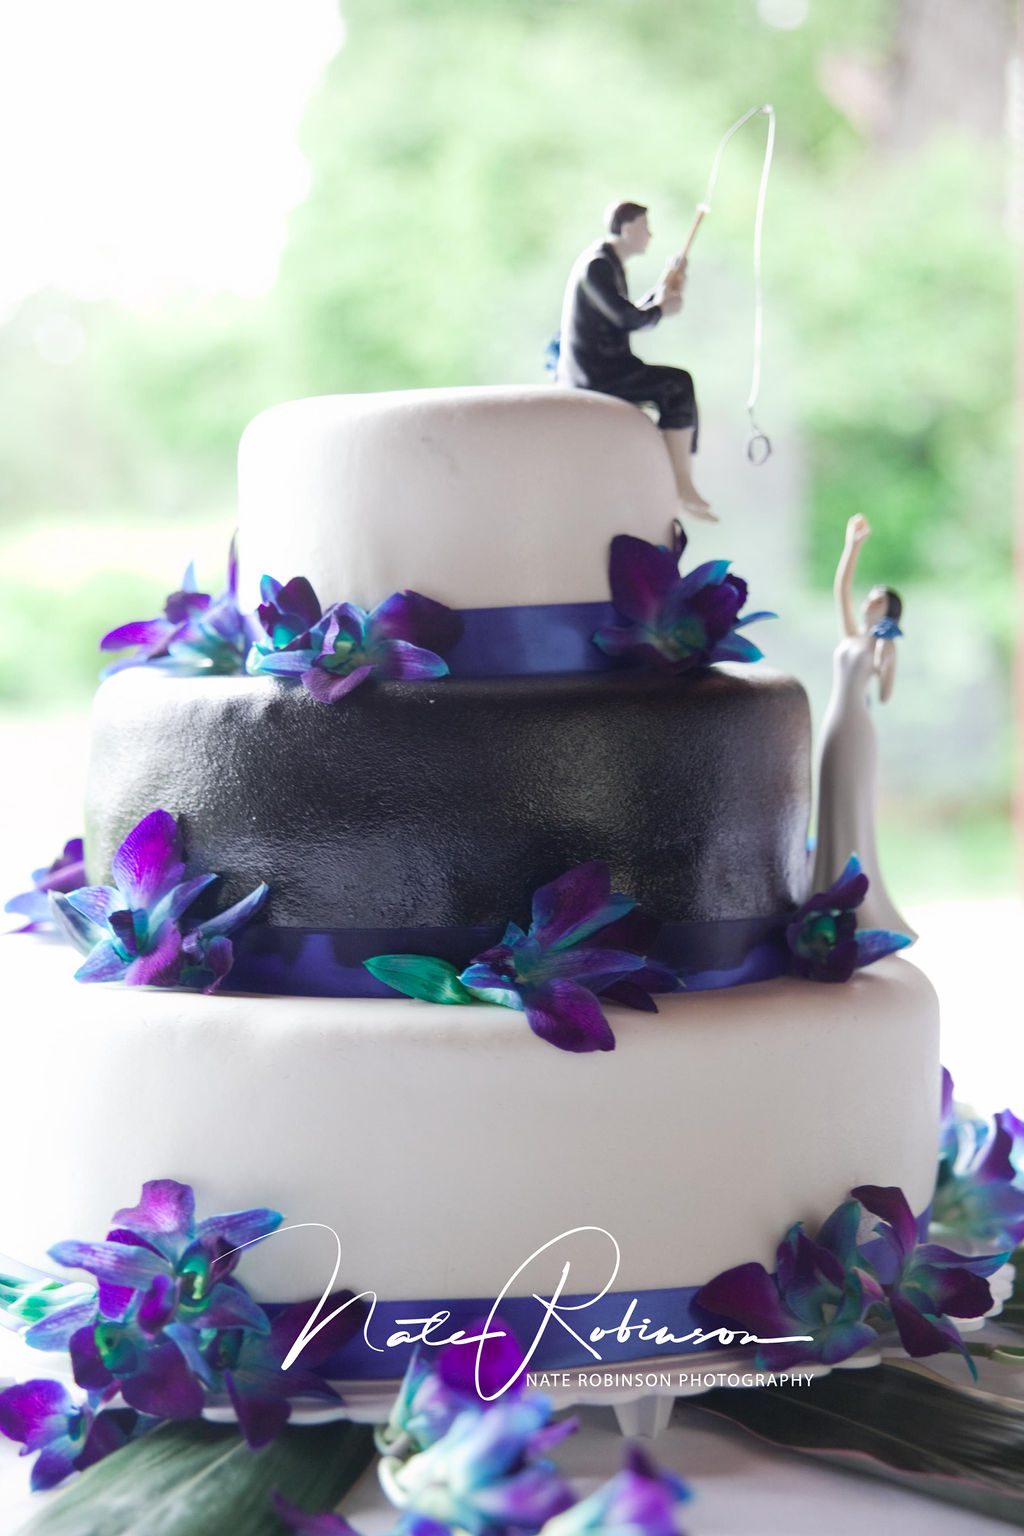 A three tier wedding cake decorated with purple flowers and figurings of groom fishing for bride with a ring zephyr lodge wedding